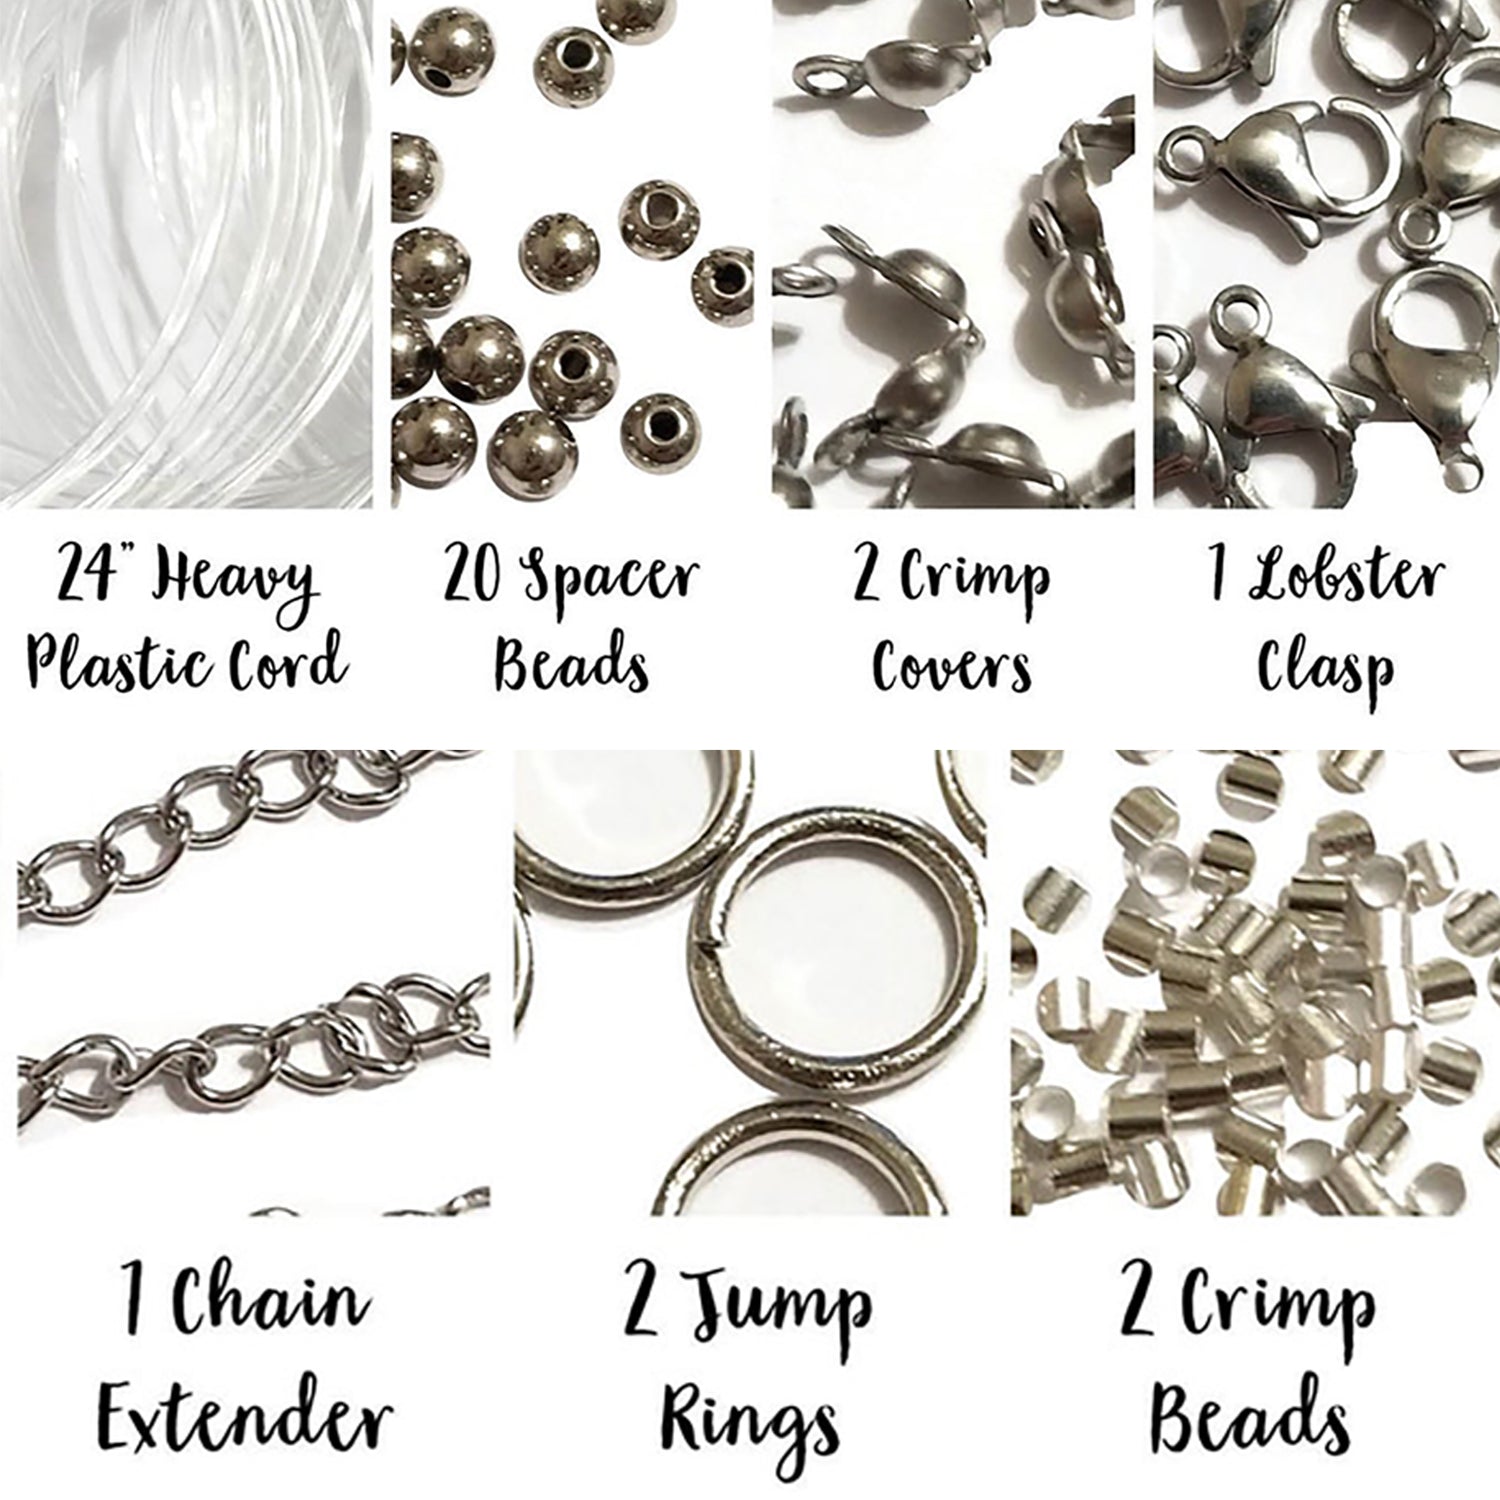 How to Make Your Own Jewellery Findings?